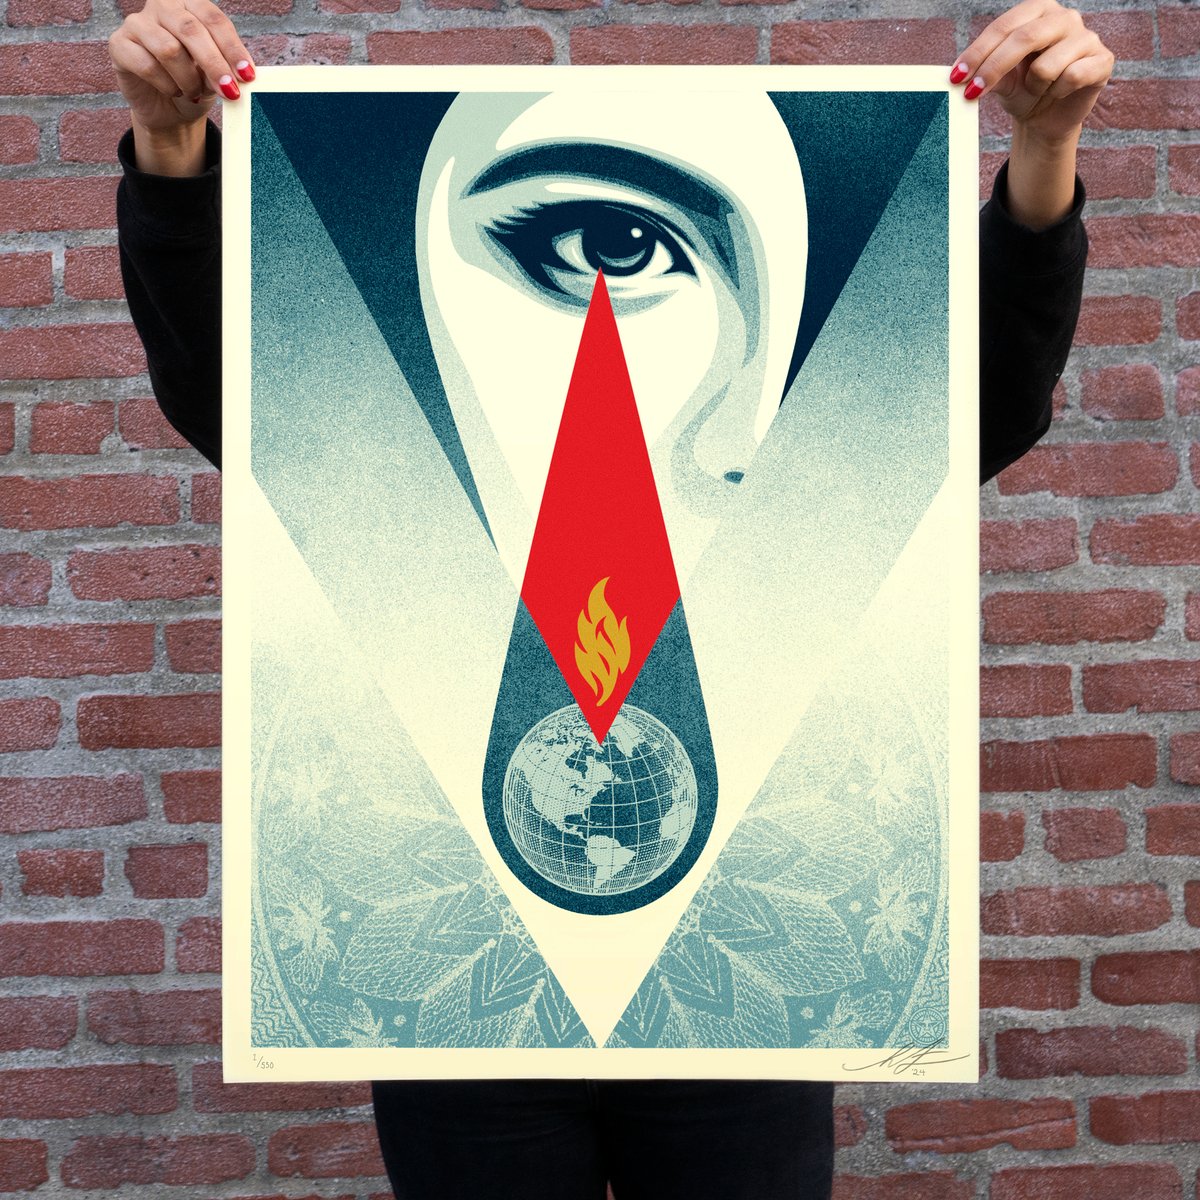 Special Raffle: Celebrating the Upcoming SeasonIII Getting ready for the launch of Season III, we're kicking off a unique raffle with a rare, physical artwork from the legend @OBEYGIANT, Shepard Fairey. Up for grabs: The 'Tear Flame' print by Shepard Fairey - a poignant